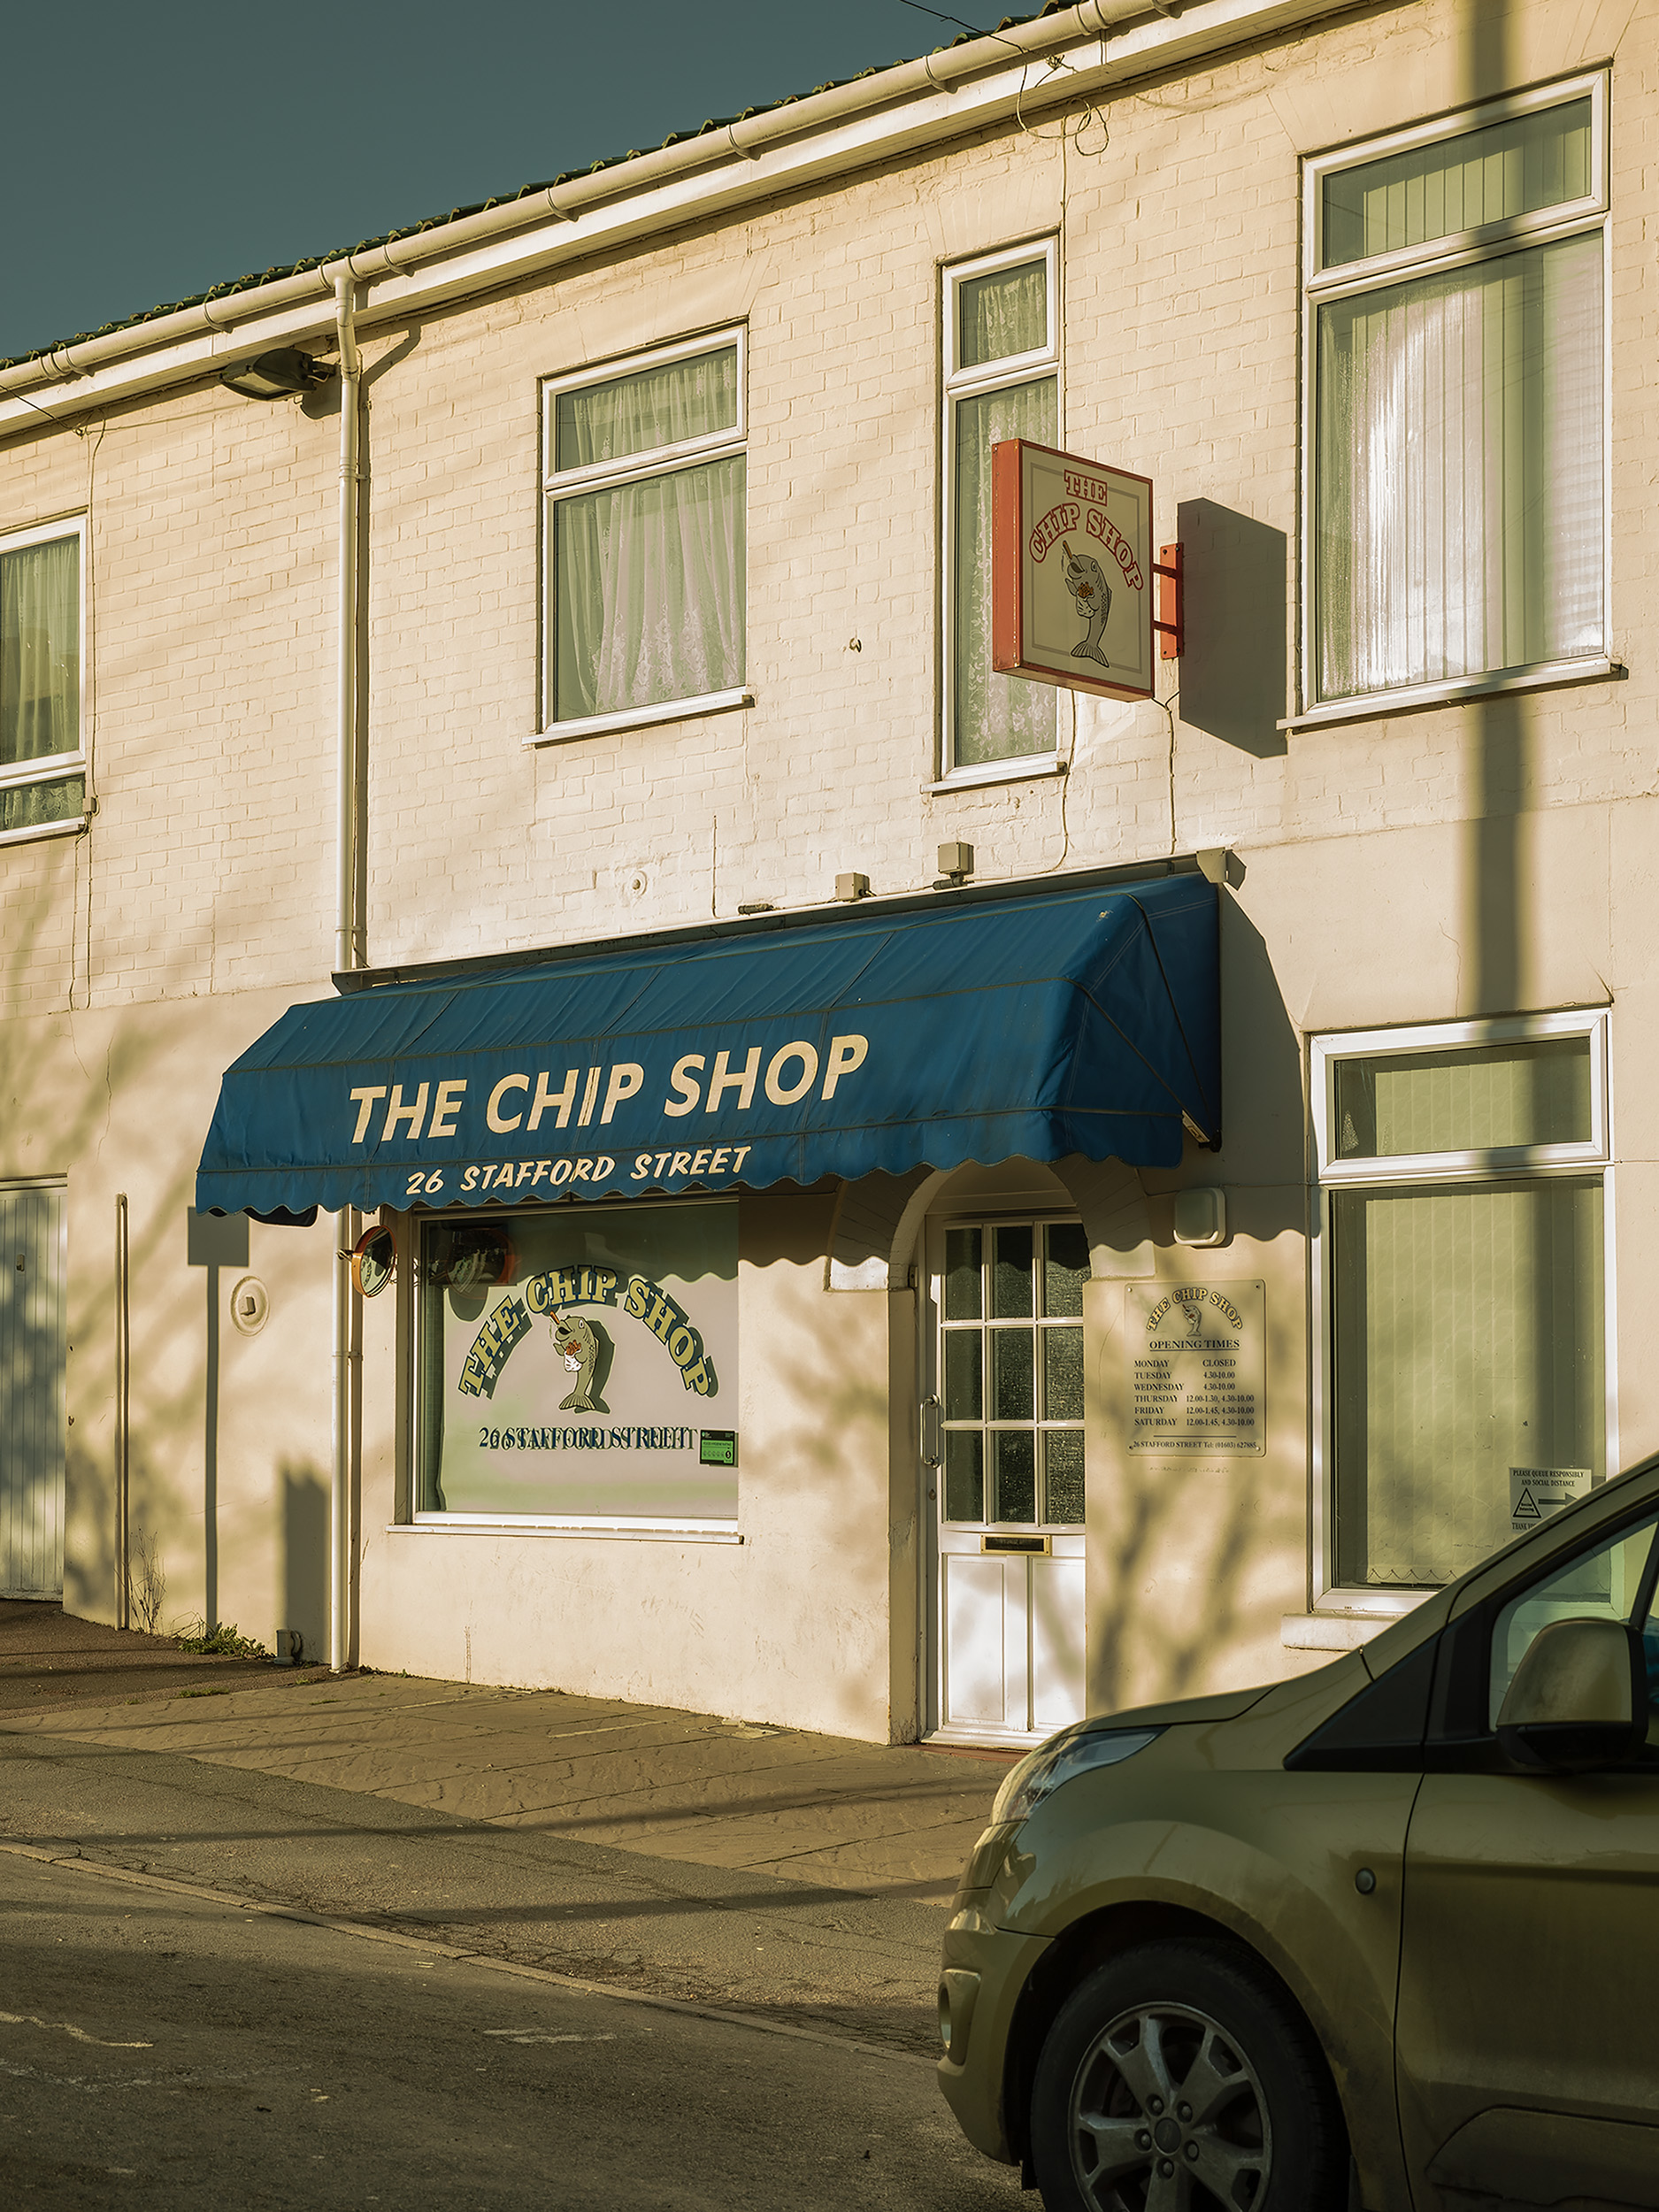 Photograph by Lauryn Boon showing a fish and chip shop with shadows of trees projected onto the walls and a car parked outside.